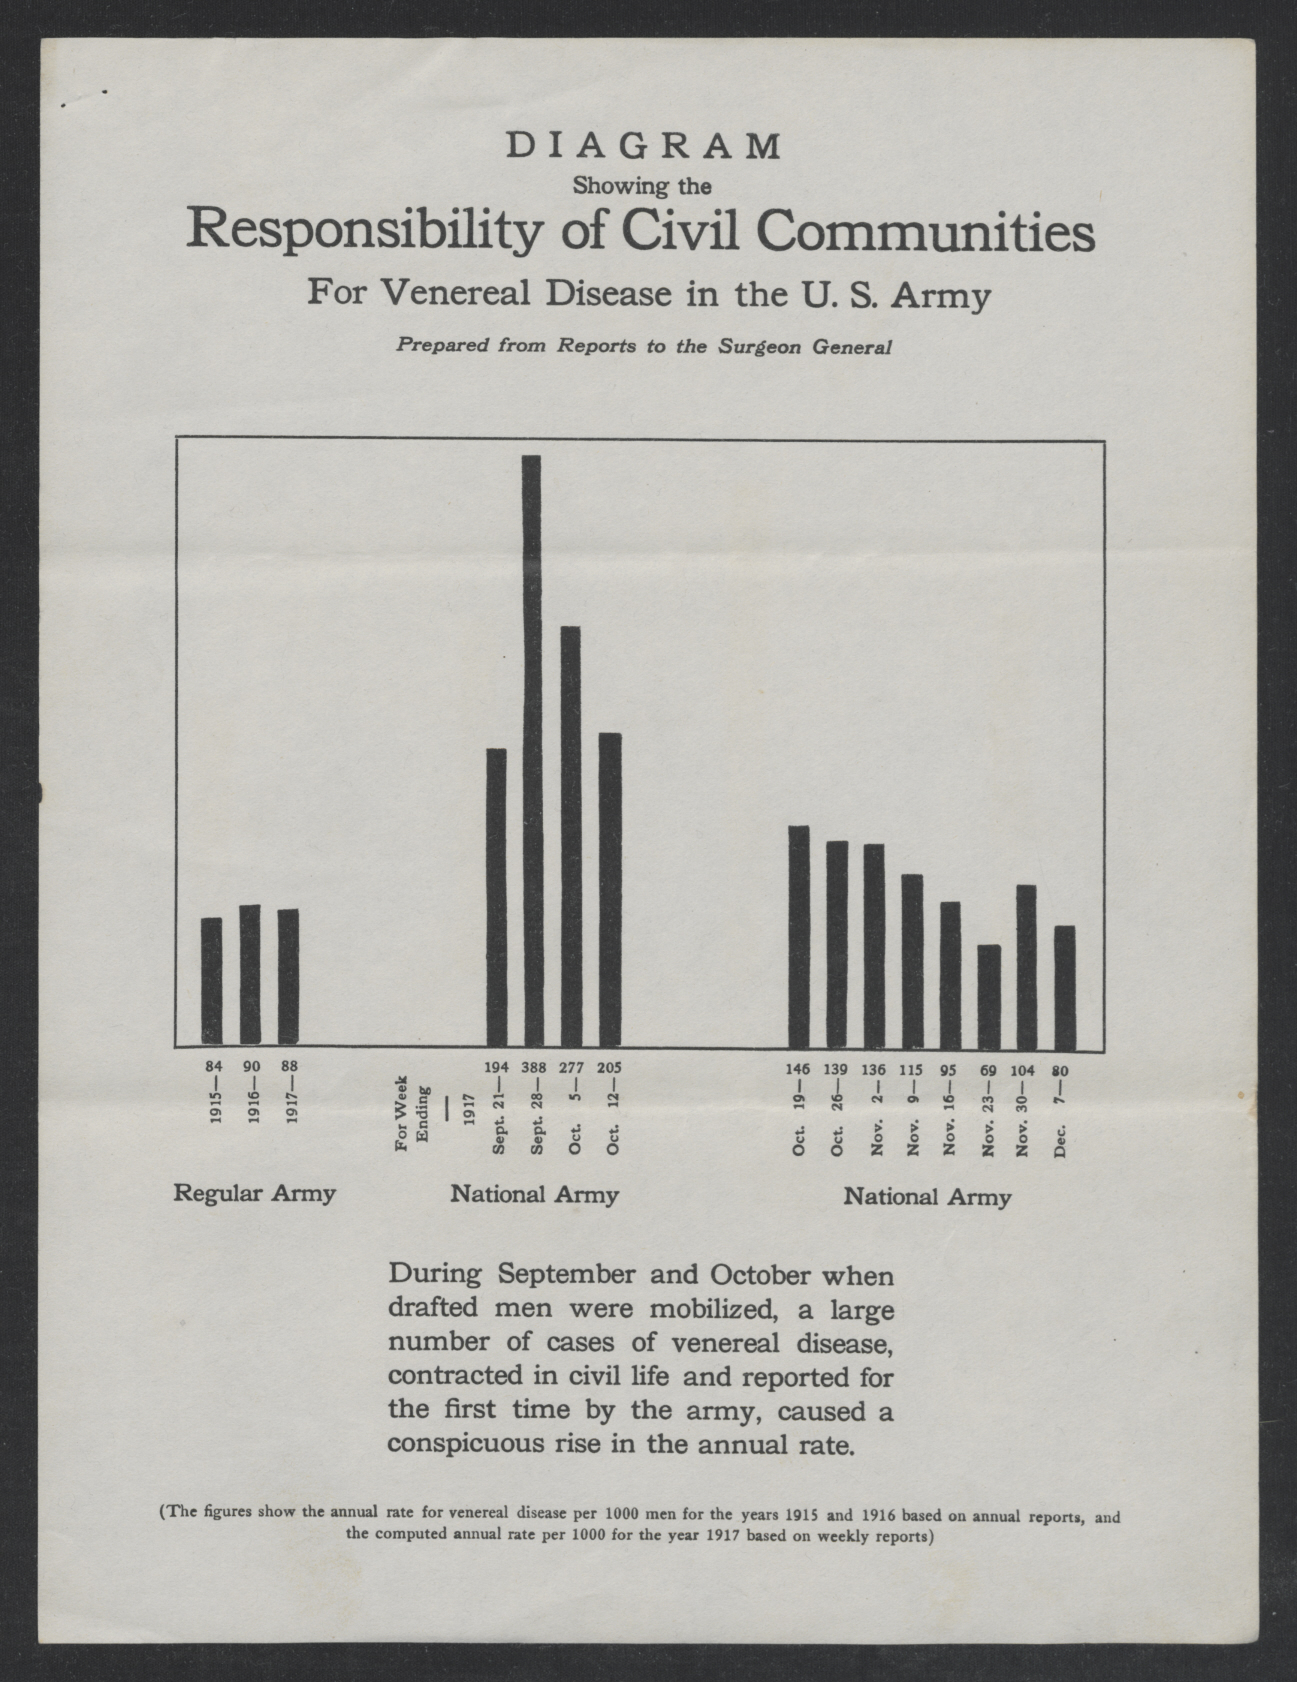 Diagram showing the Responsibility of Civil Communities for Disease in the U.S. Army, circa 1918